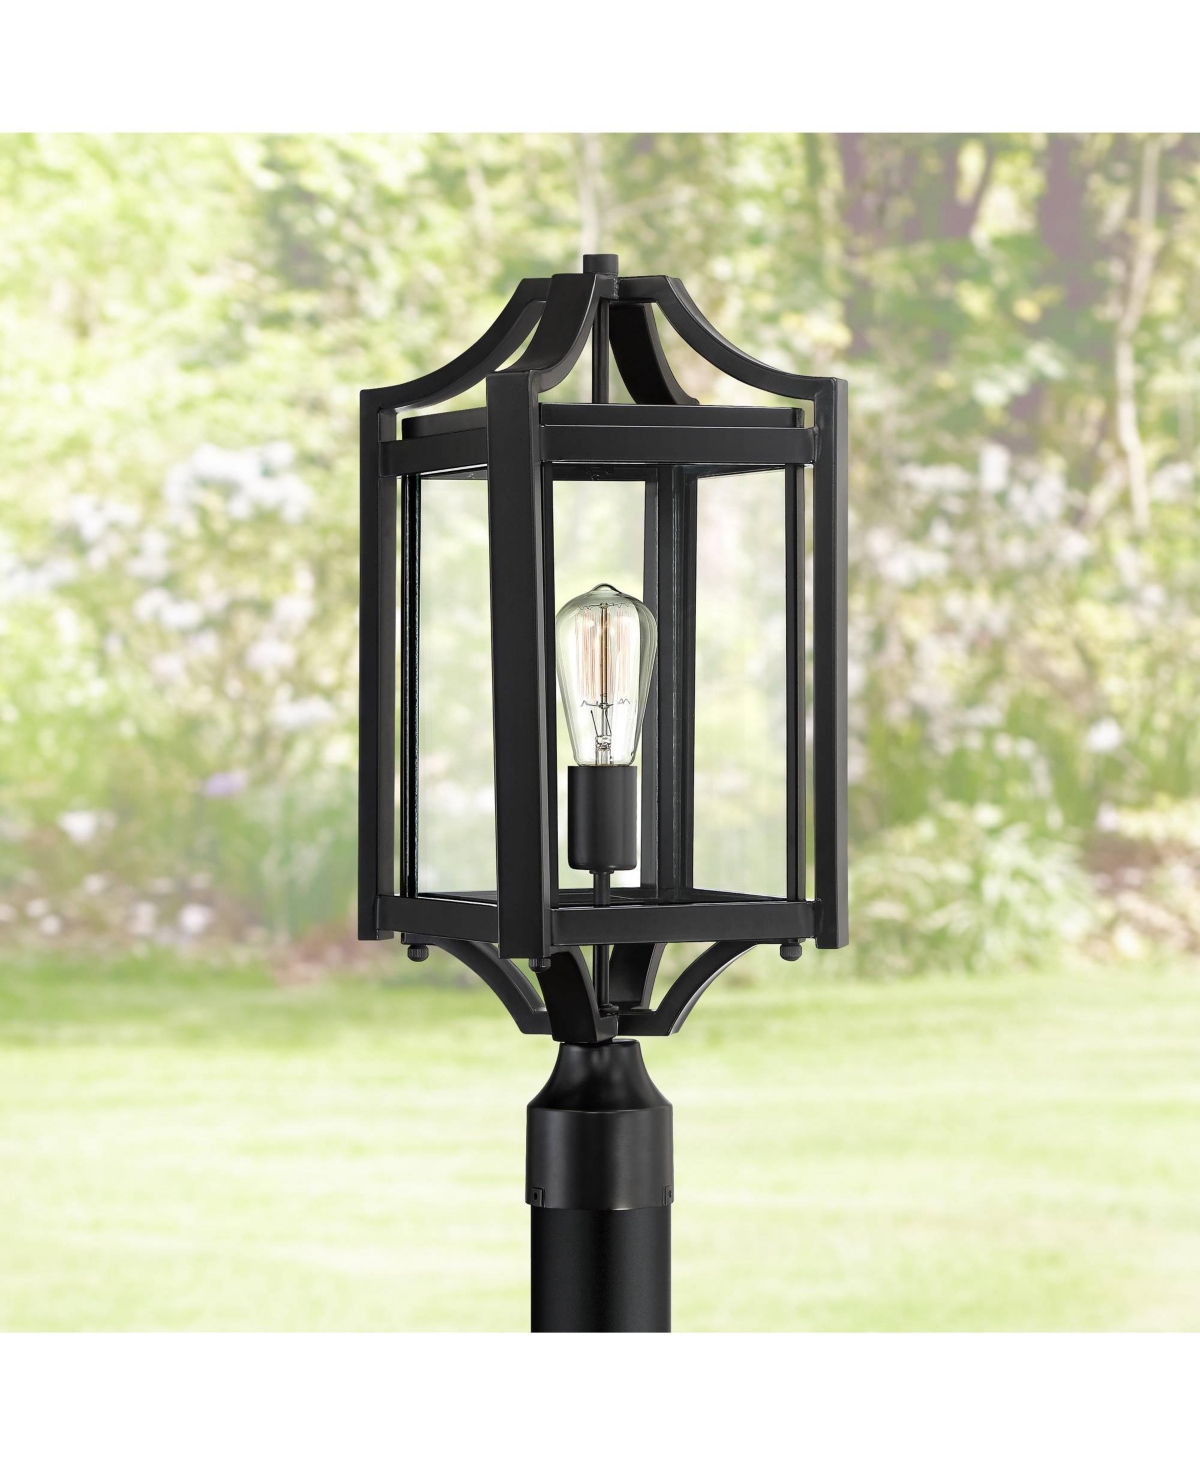 Rockford Collection Rustic Farmhouse Outdoor Post Light Fixture Black Iron 20 1/4" Clear Beveled Glass for Exterior House Porch Patio Outside Deck Gar